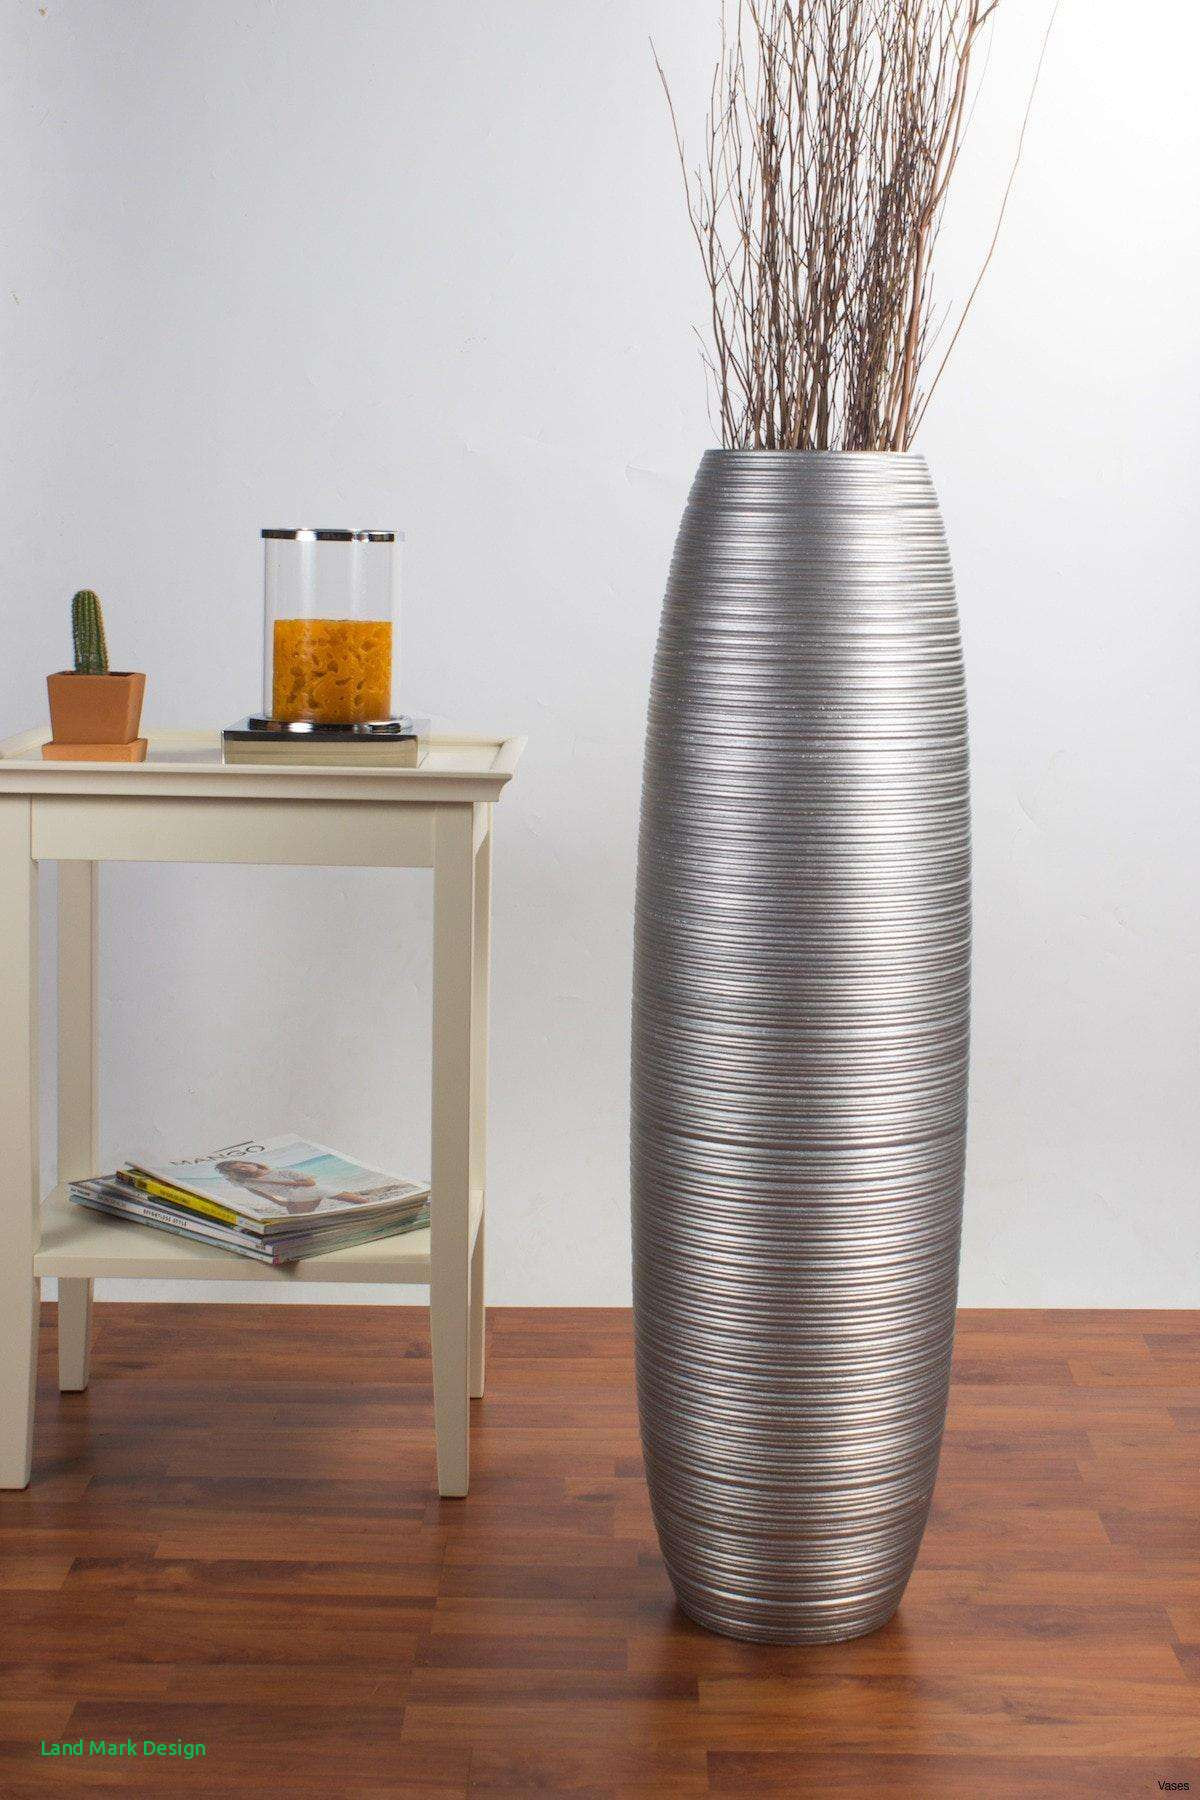 large silver floor vase of image of large metal floor vases vases artificial plants collection pertaining to large metal floor vases image silver floor vase design of image of large metal floor vases